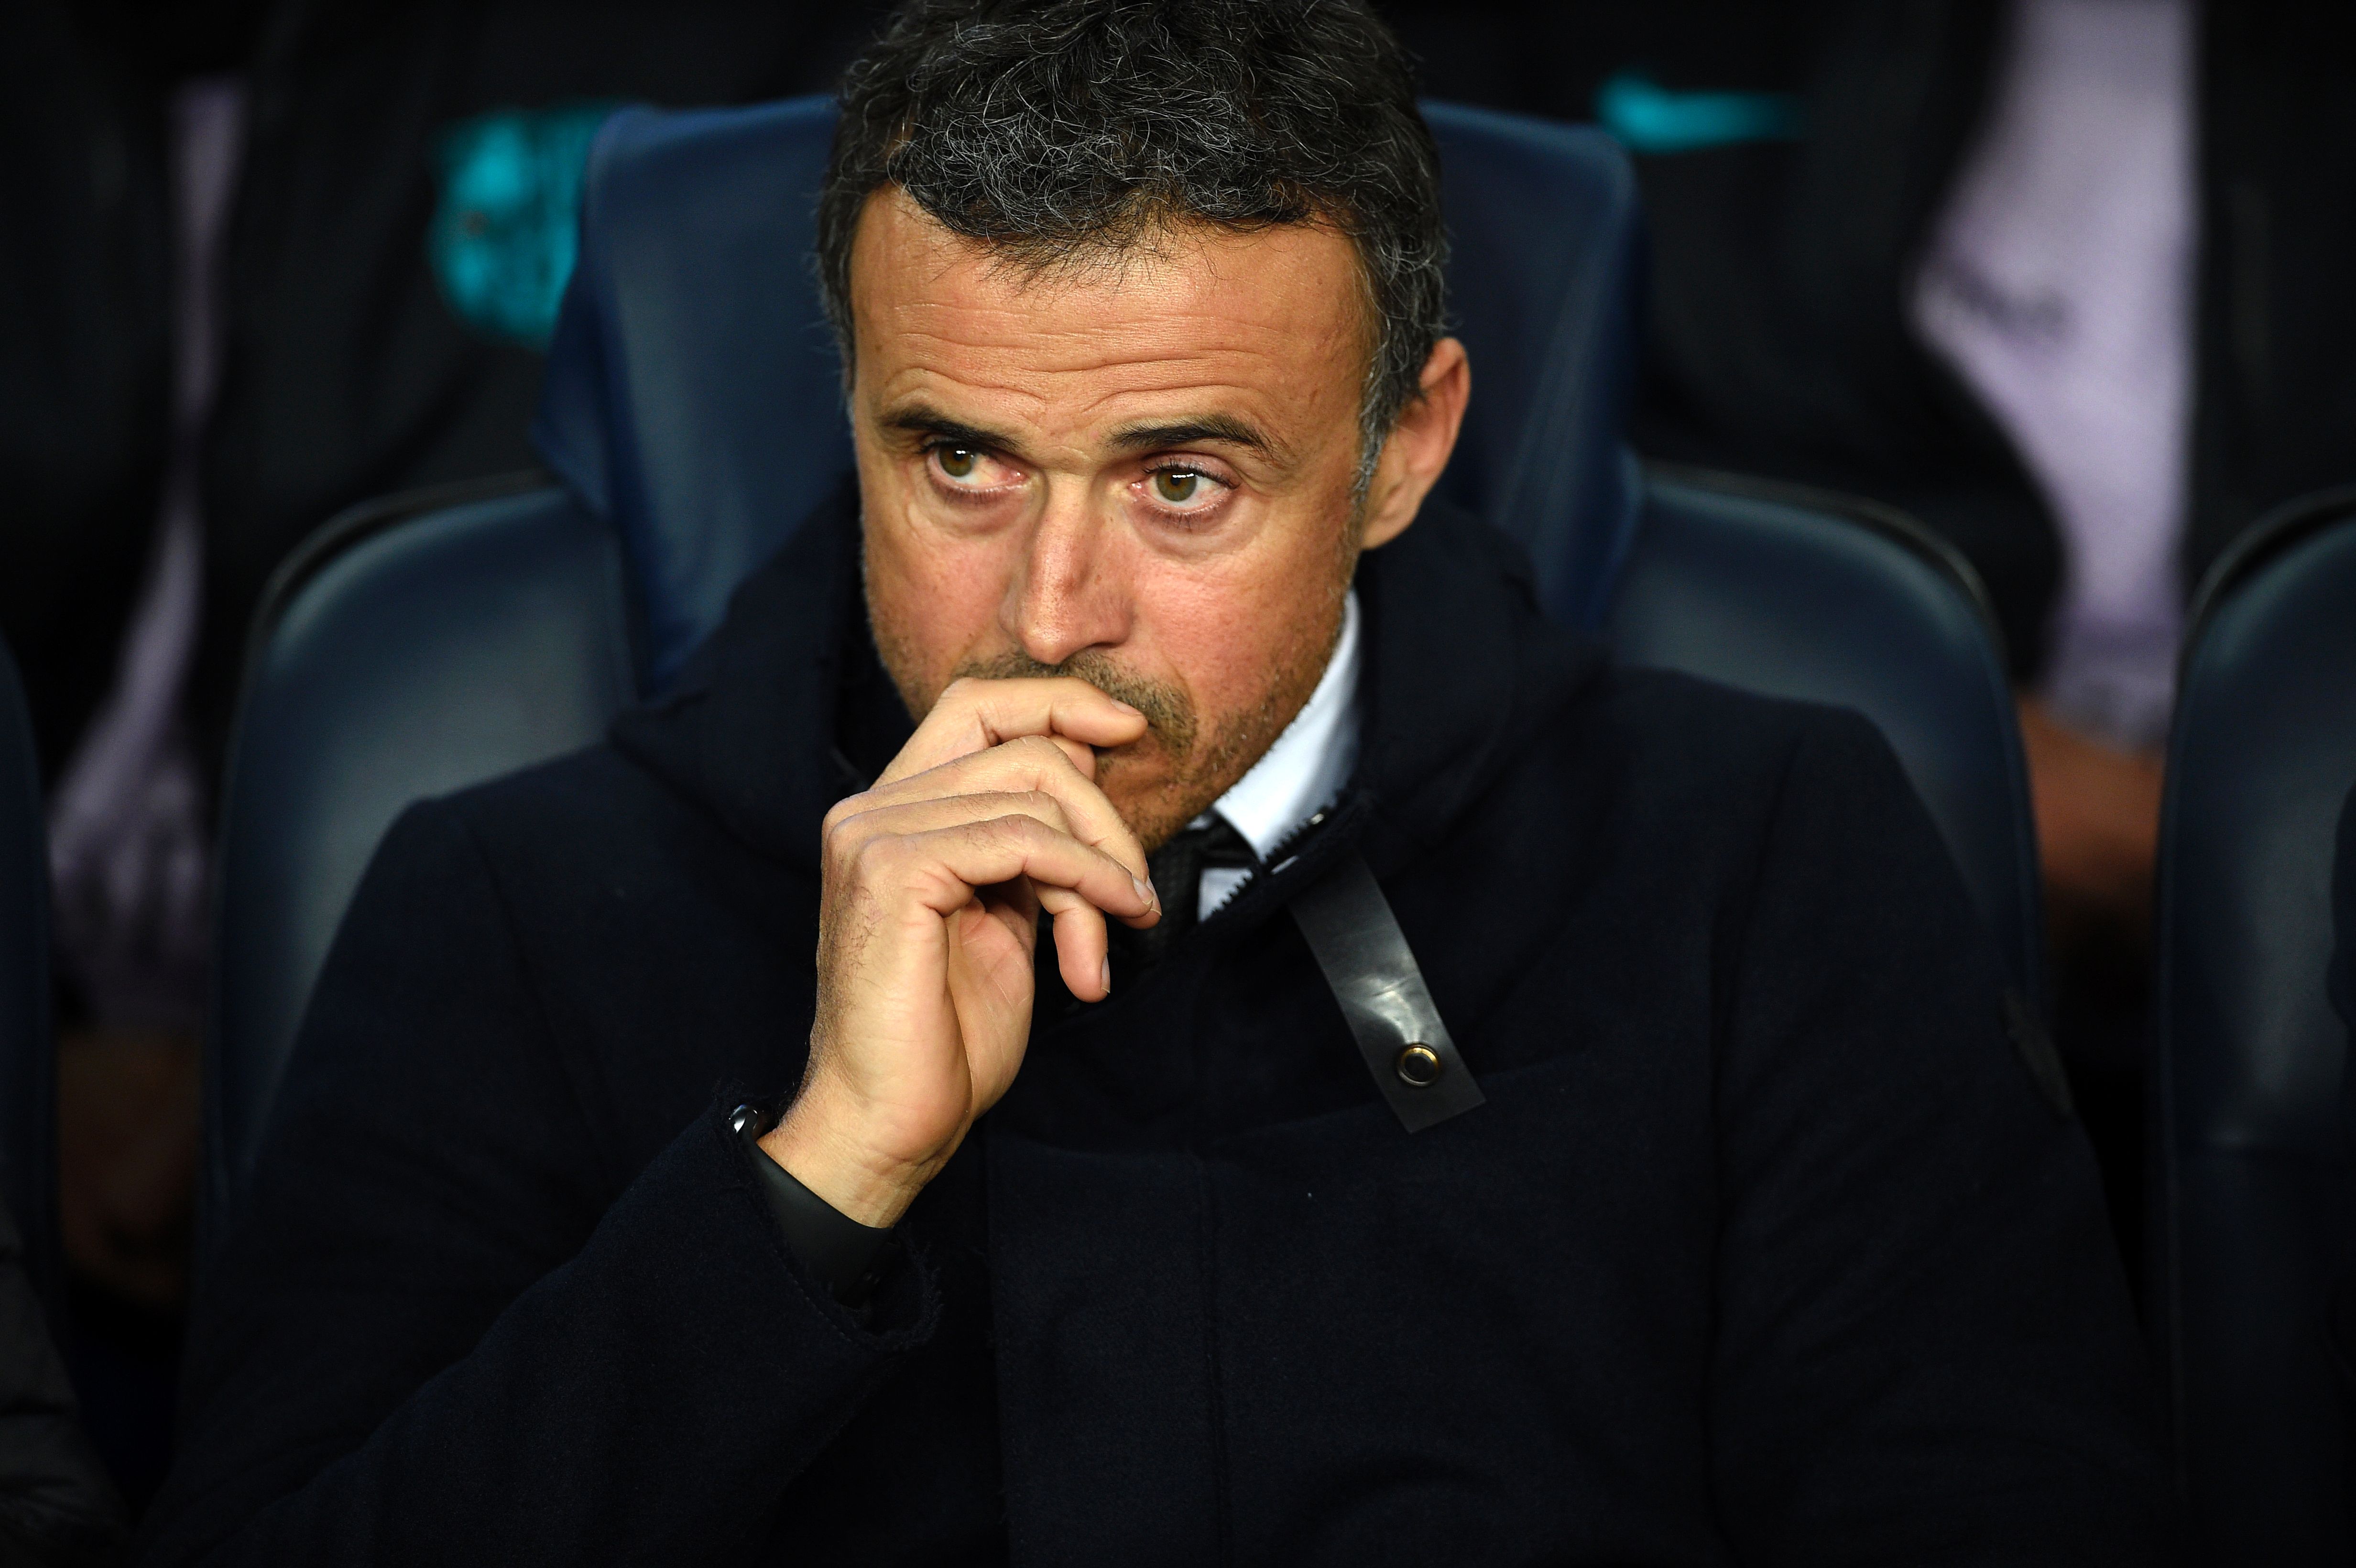 Barcelona's coach Luis Enrique looks on before attending the UEFA Champions League Group C football match FC Barcelona vs Borussia Moenchengladbach at the Camp Nou stadium in Barcelona, on December 6, 2016. / AFP / LLUIS GENE        (Photo credit should read LLUIS GENE/AFP/Getty Images)